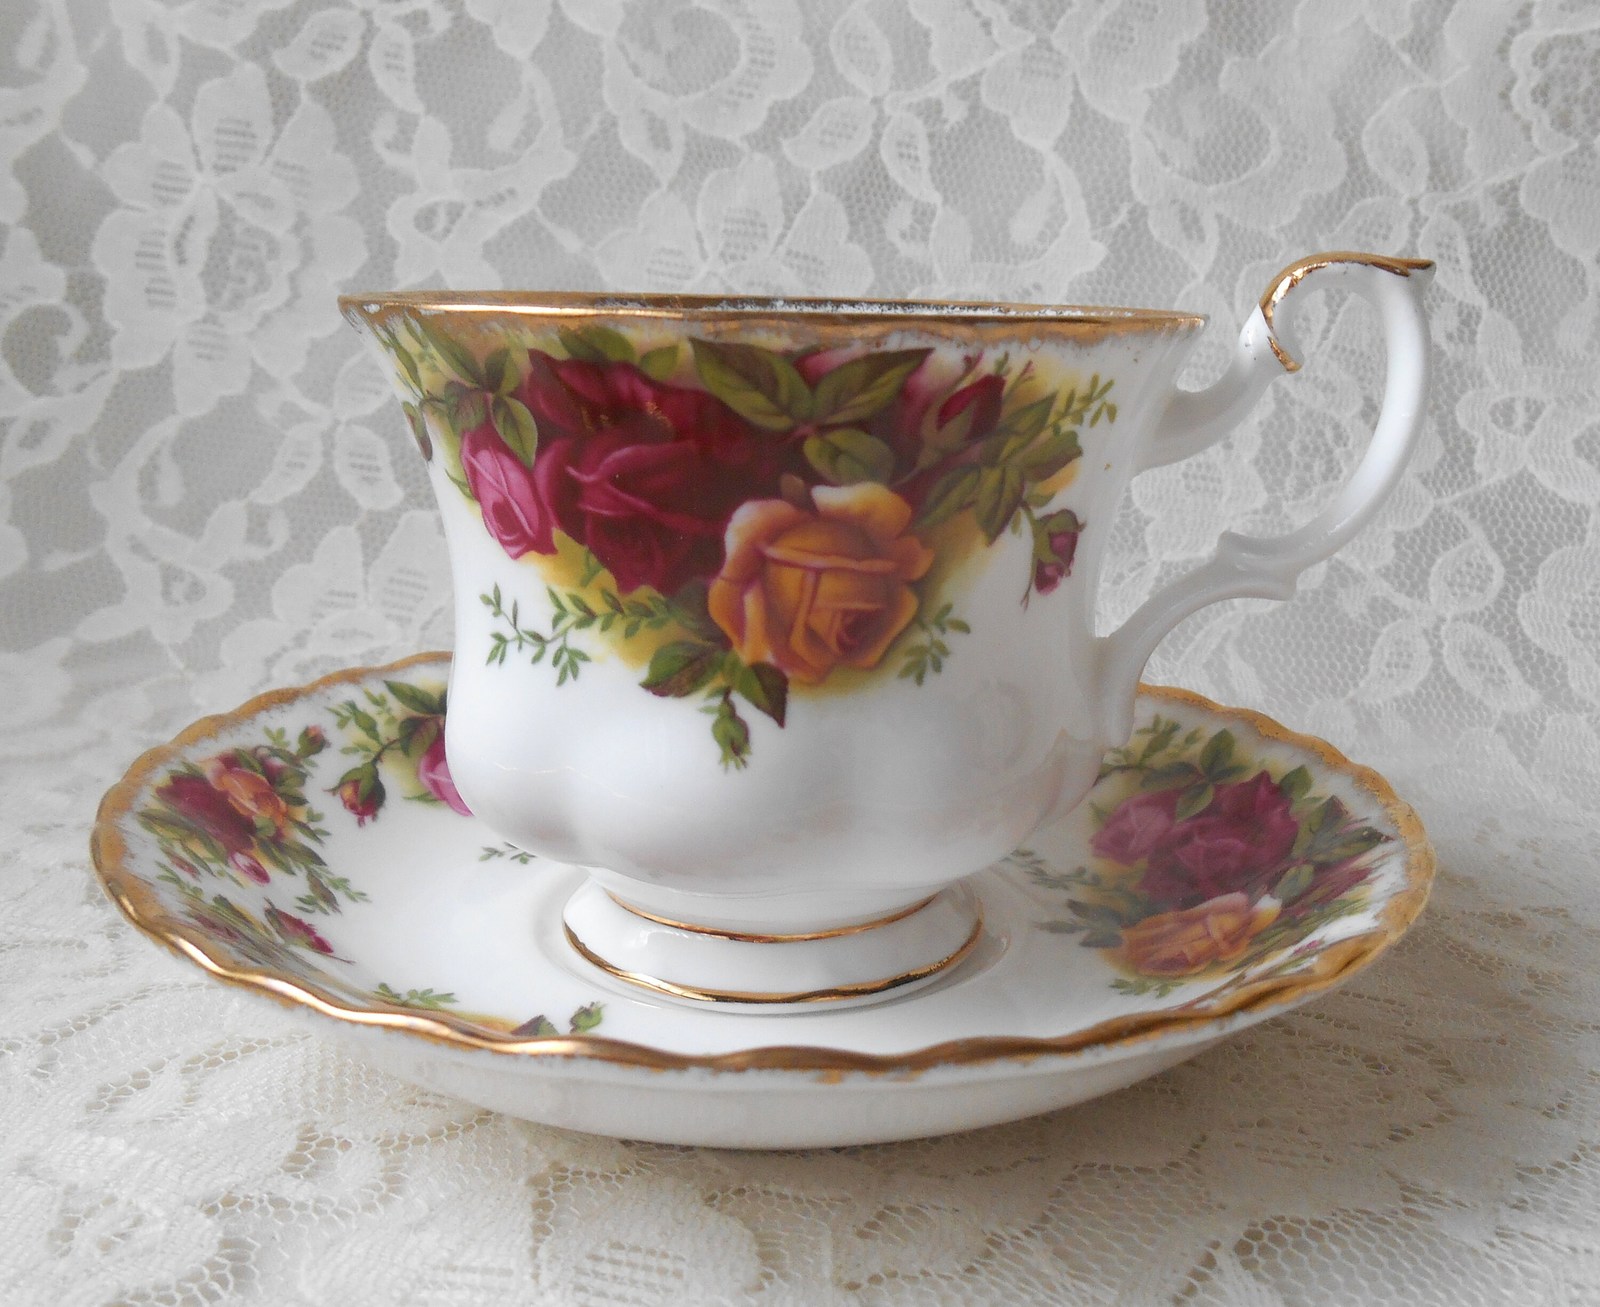 Vintage Teacup and Saucer Set Old Country Roses by Royal Albert, Gold Trim Made  - $16.00